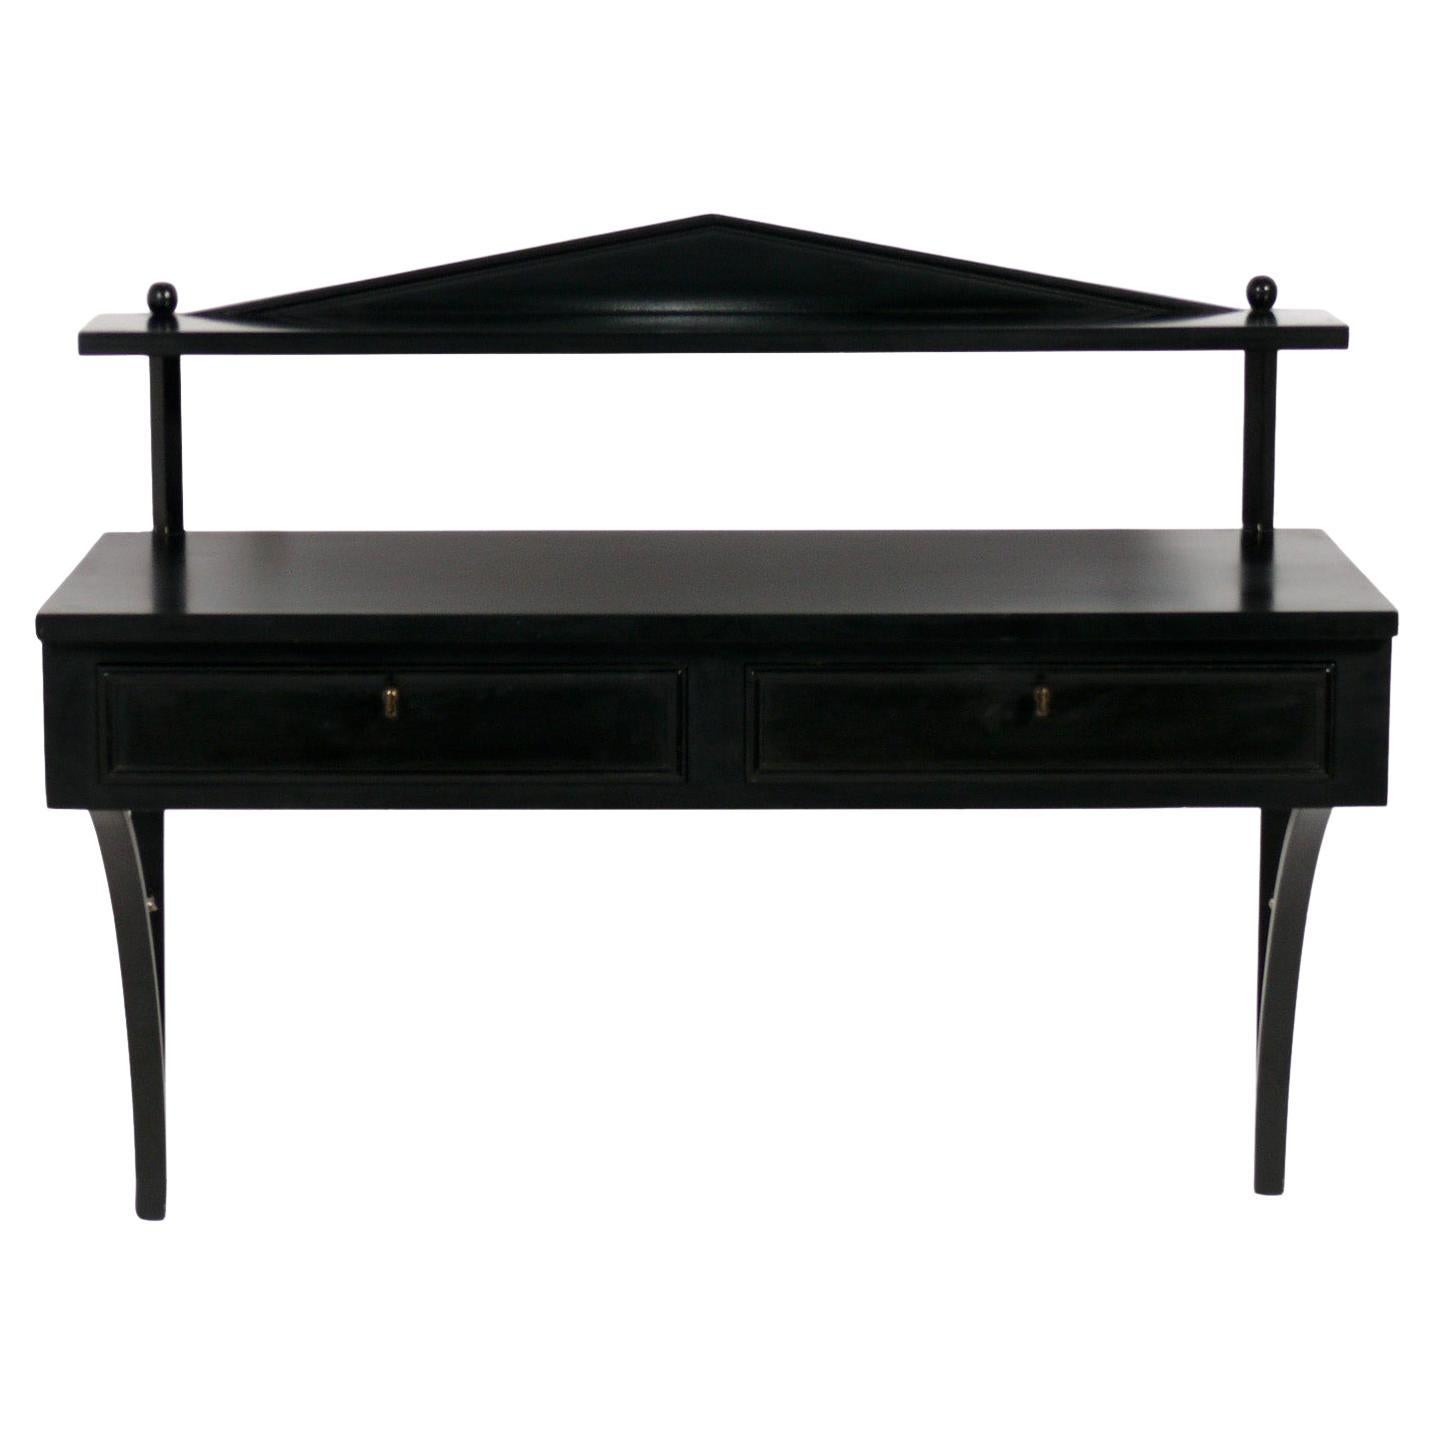 H. Sacks & Sons Console Tables